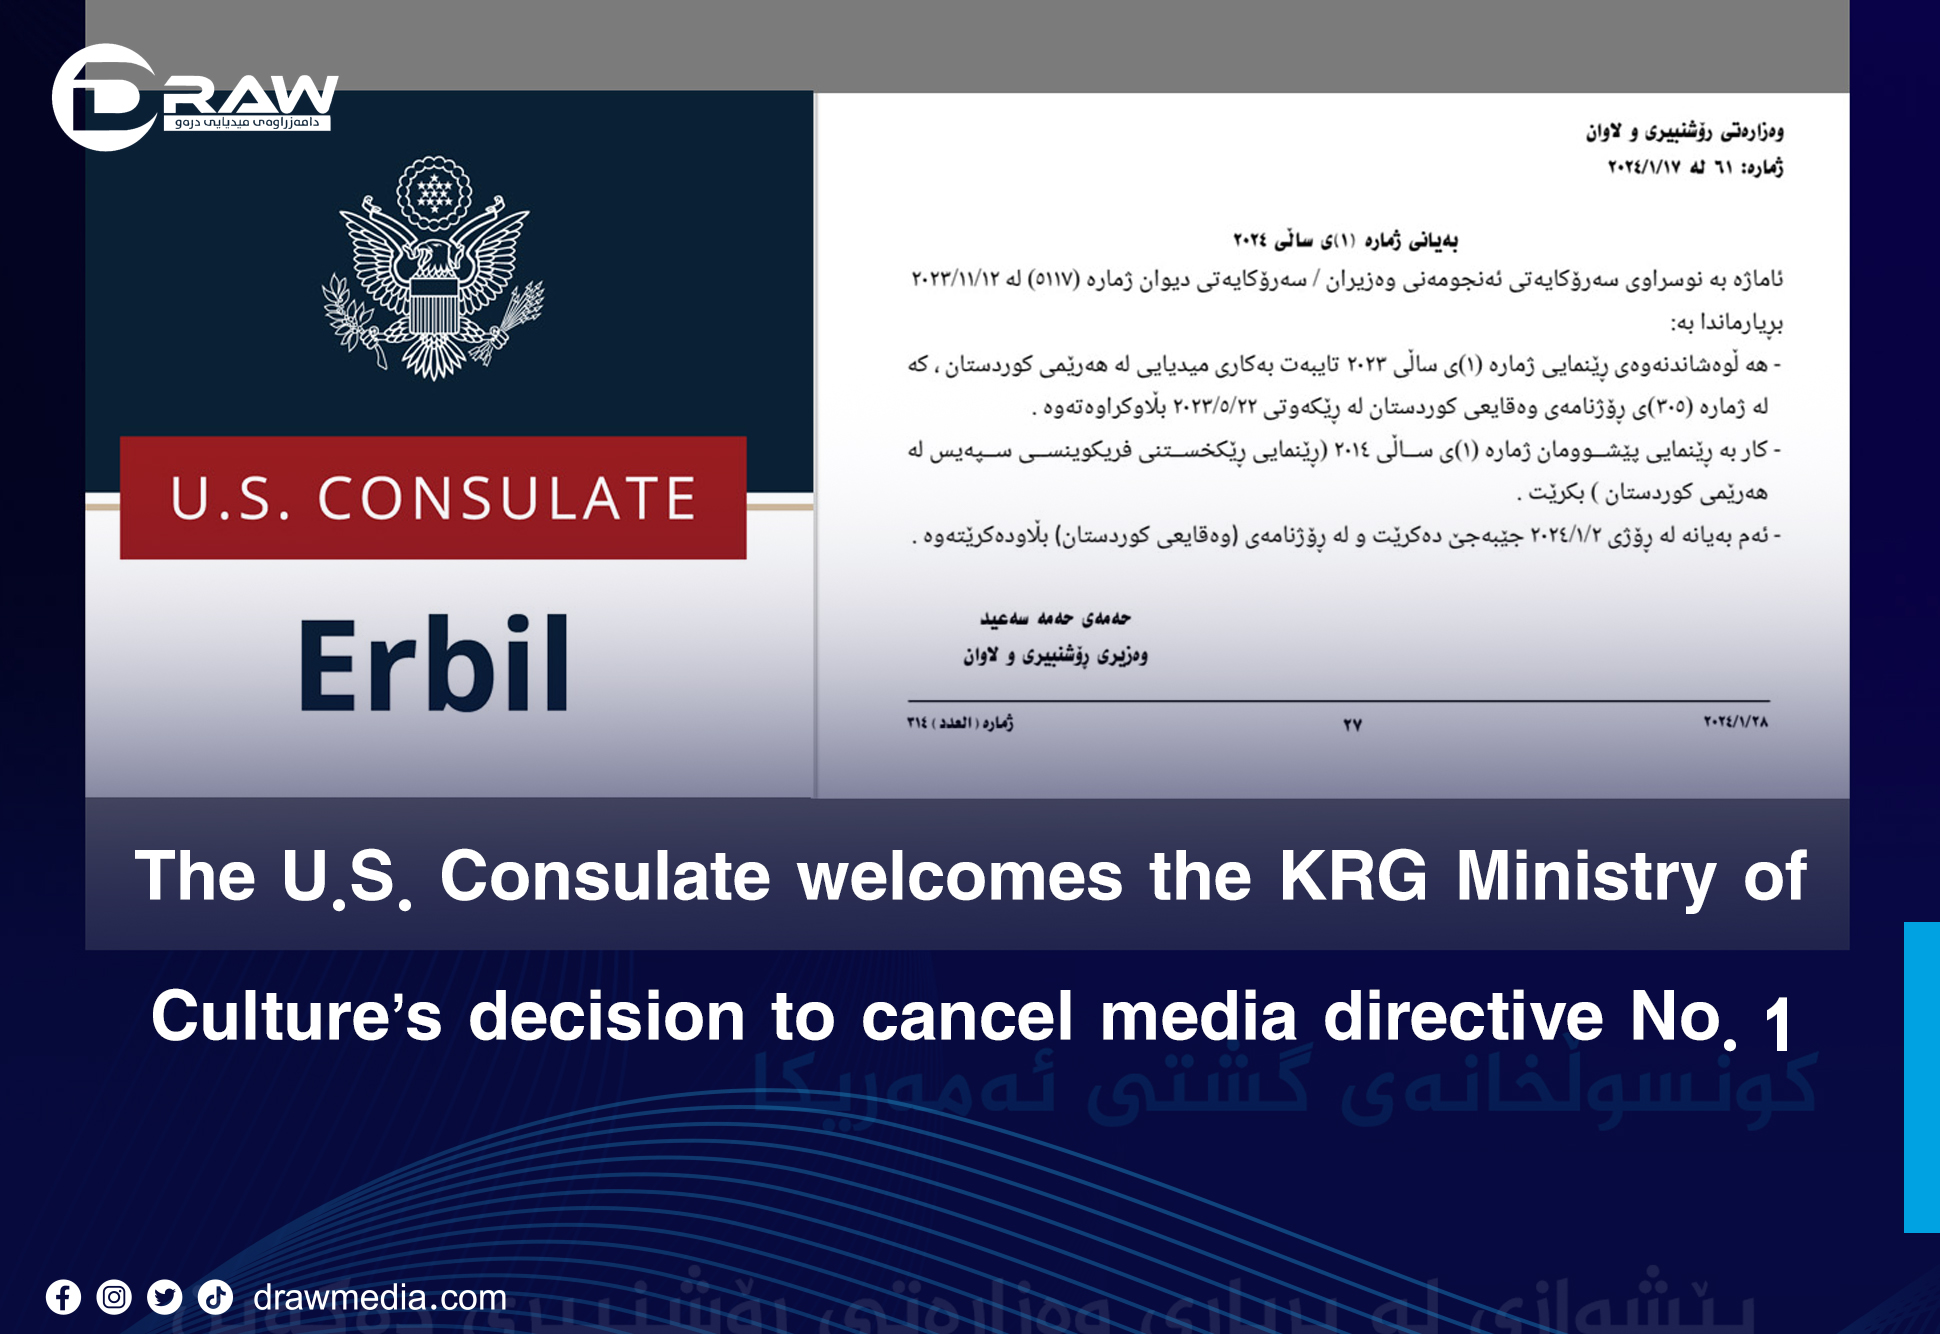 DrawMedia.net / The U.S. Consulate welcomes the KRG Ministry of Culture’s decision to cancel media directive No. 1